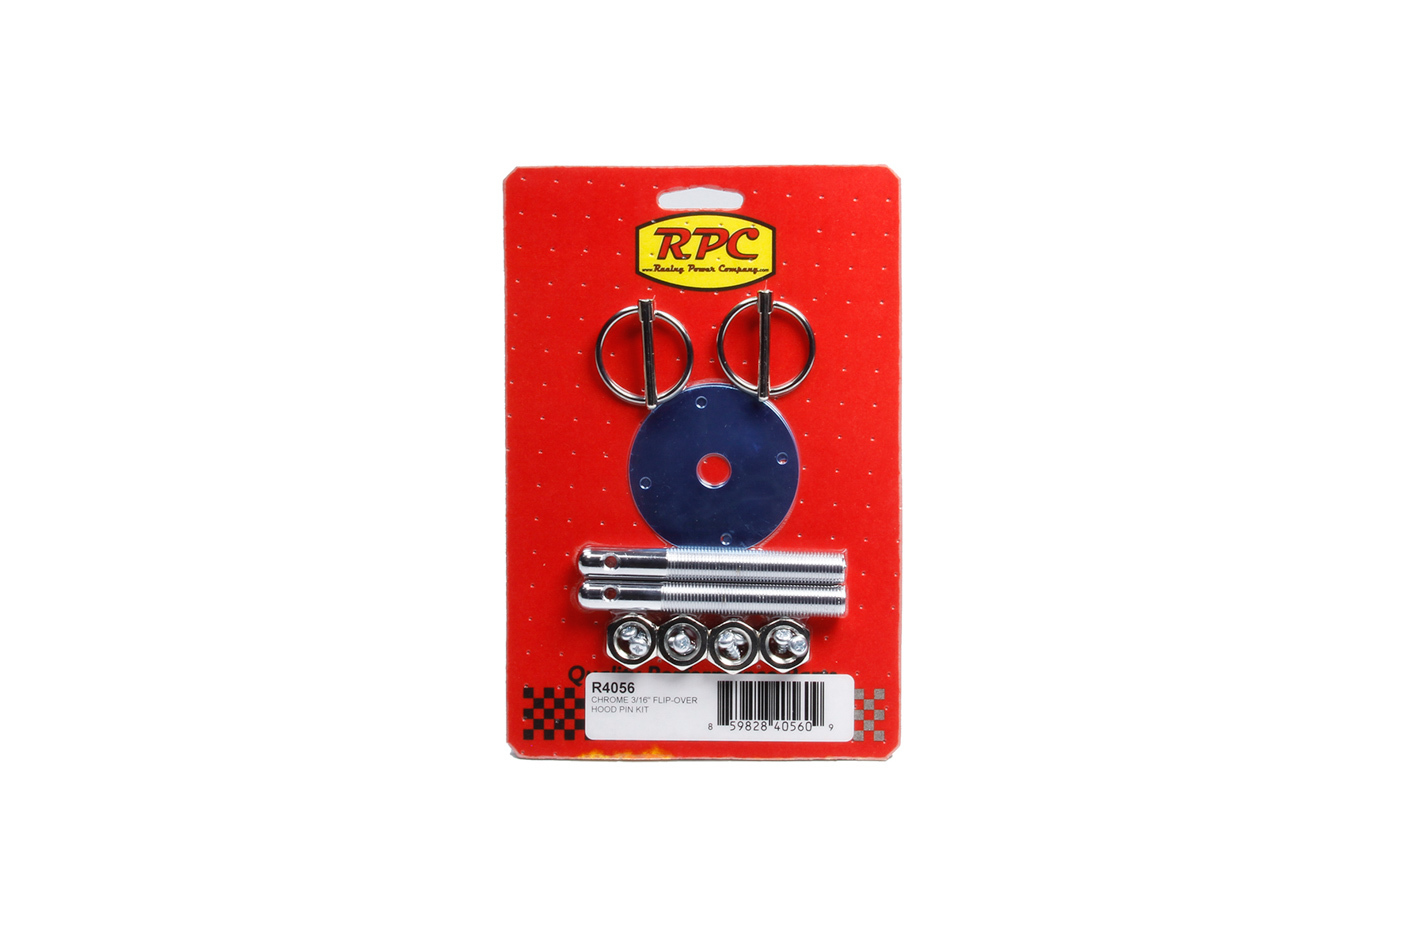 Racing Power Company R4056 Hood Pin, 1/2 in OD x 4 in Long, 2-1/2 in OD Scuff Plates, Torsion Clips, Hardware Included, Steel, Chrome, Kit